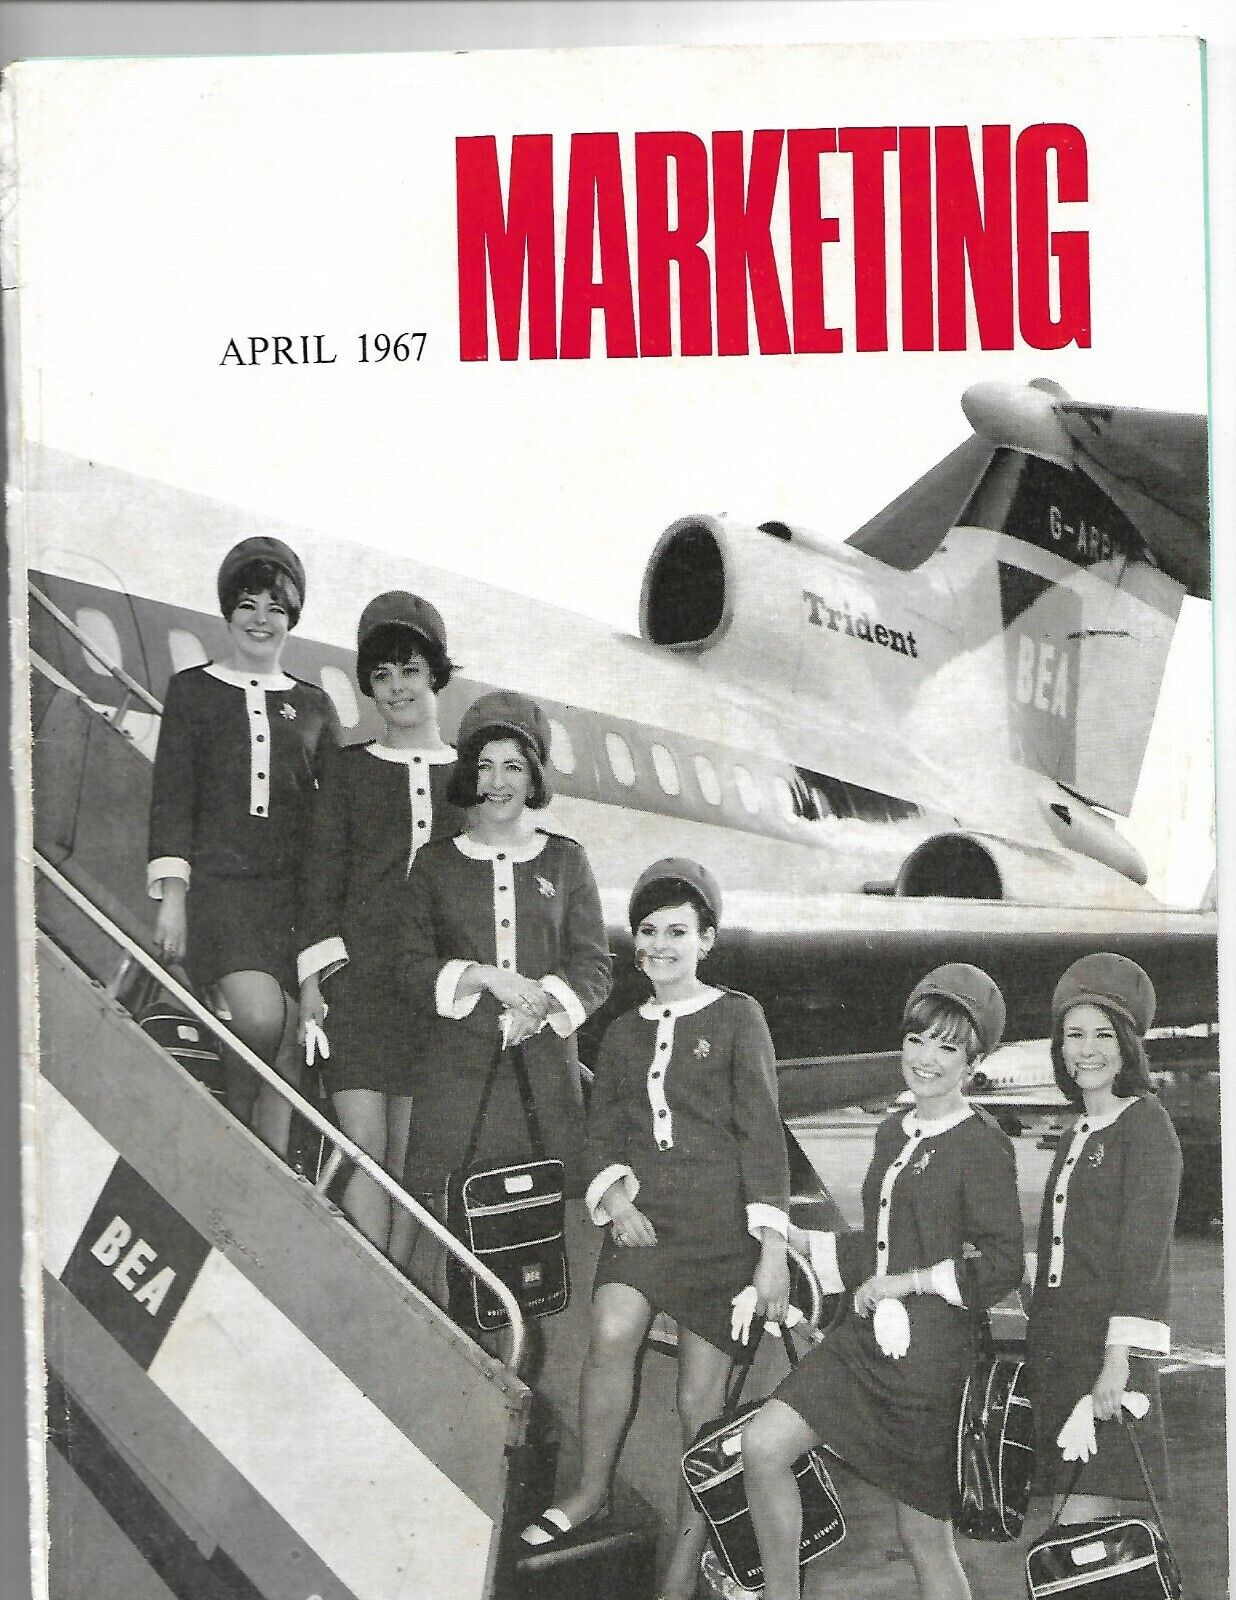 1967 April Edition MARKETING featuring BEA Trident & Air crew